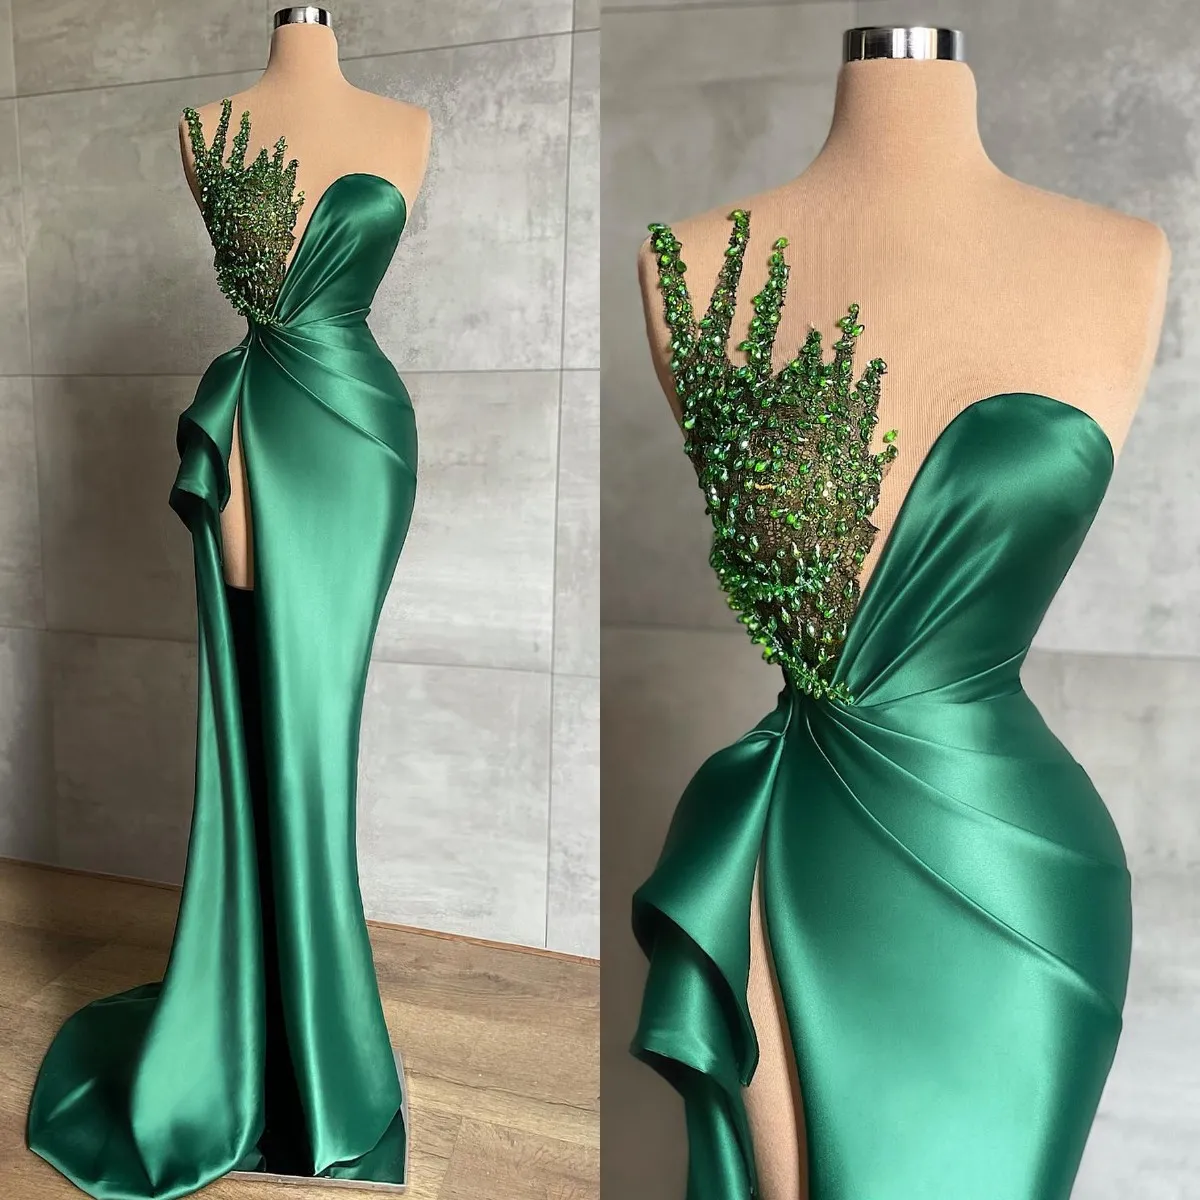 Green Mermaid Evening Dresses Beads Collar Party Prom Pleats Split Formal Long Red Carpet Dress For Special Ocn